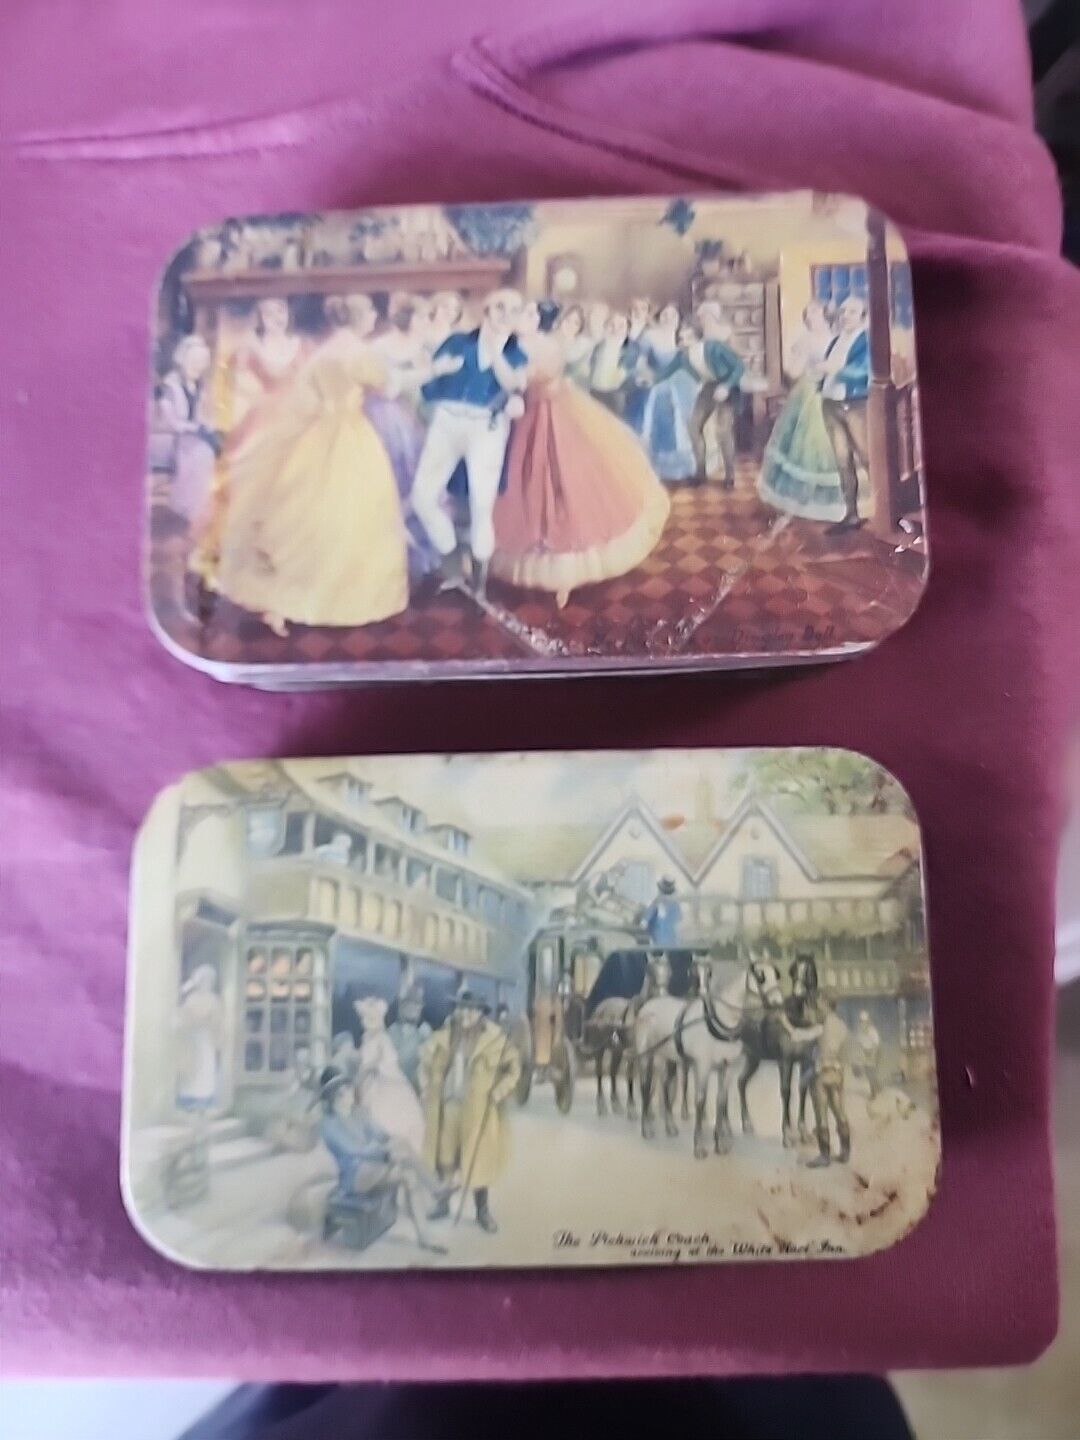 Vintage Thornes Toffee tins (empty), Leeds England, great graphics & colors